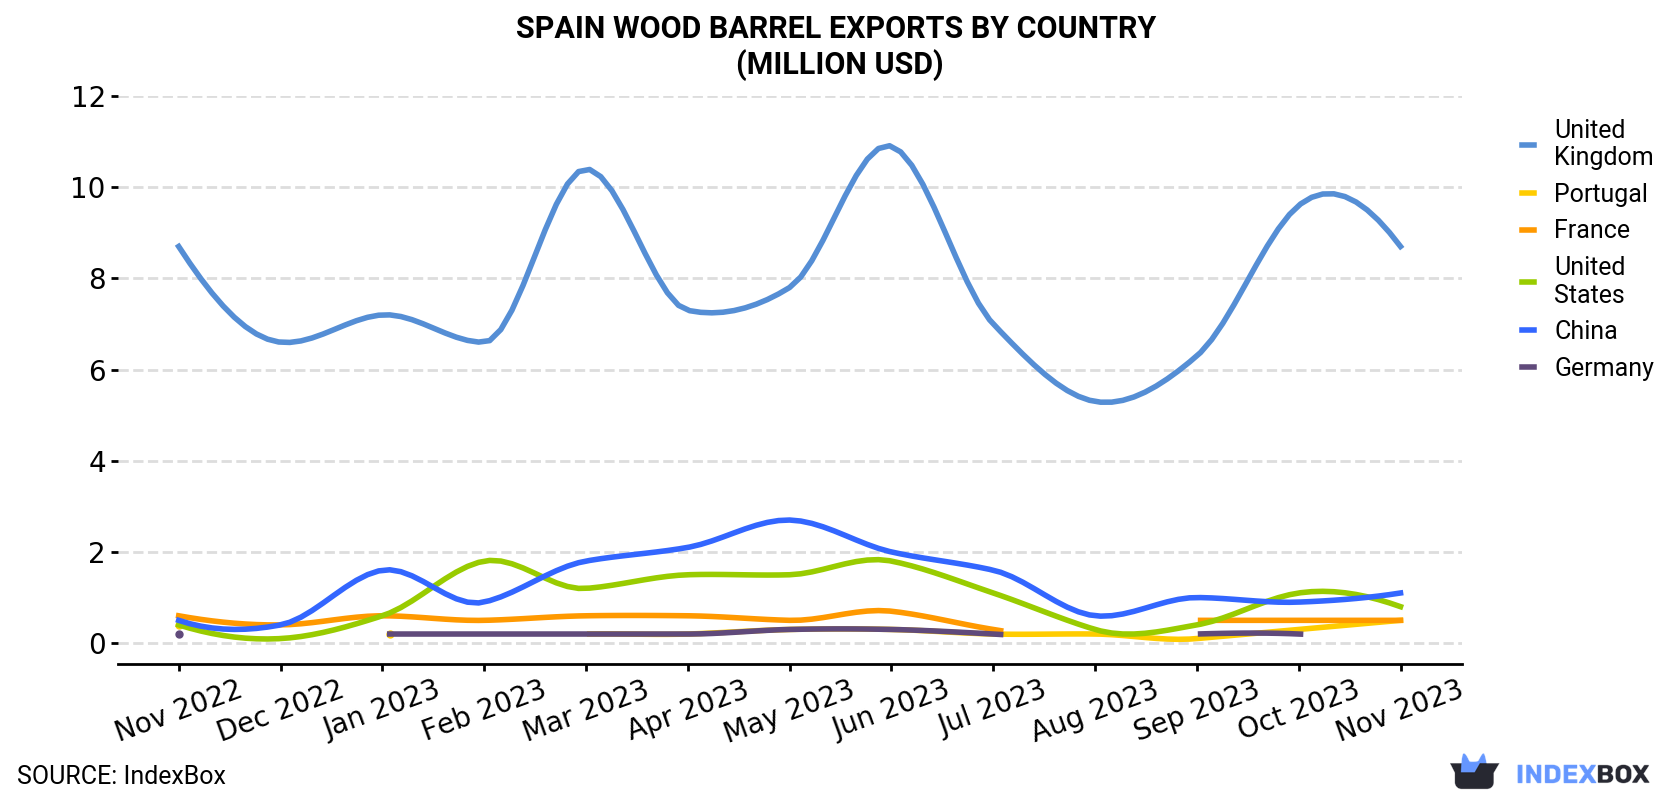 Spain Wood Barrel Exports By Country (Million USD)